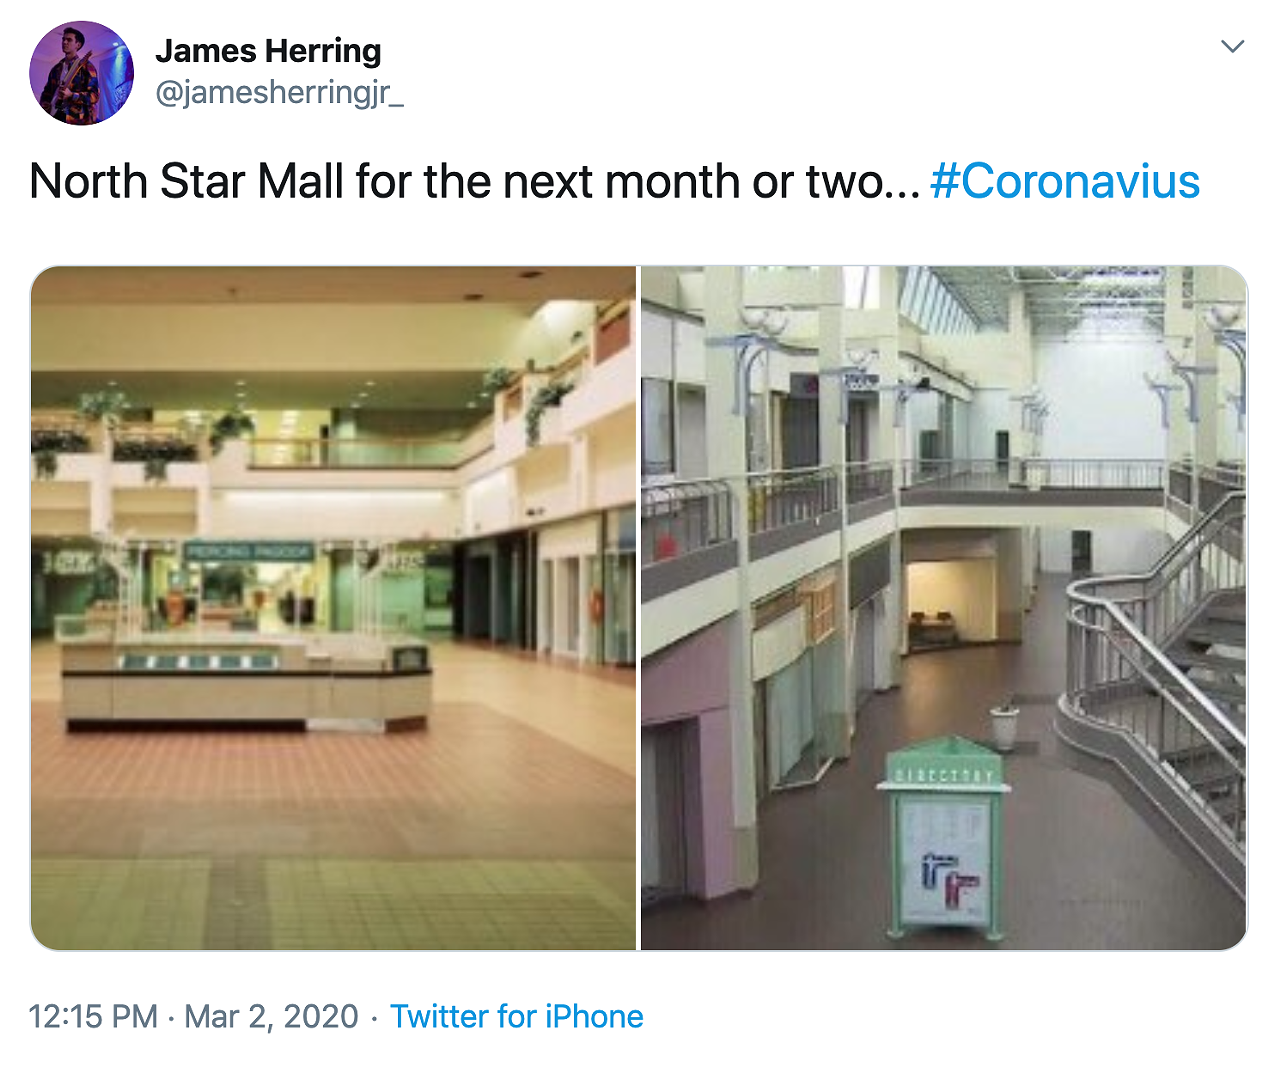 North Star Mall Closes for Deep Cleaning After Coronavirus Evacuee Visit, San Antonio Responds with Memes